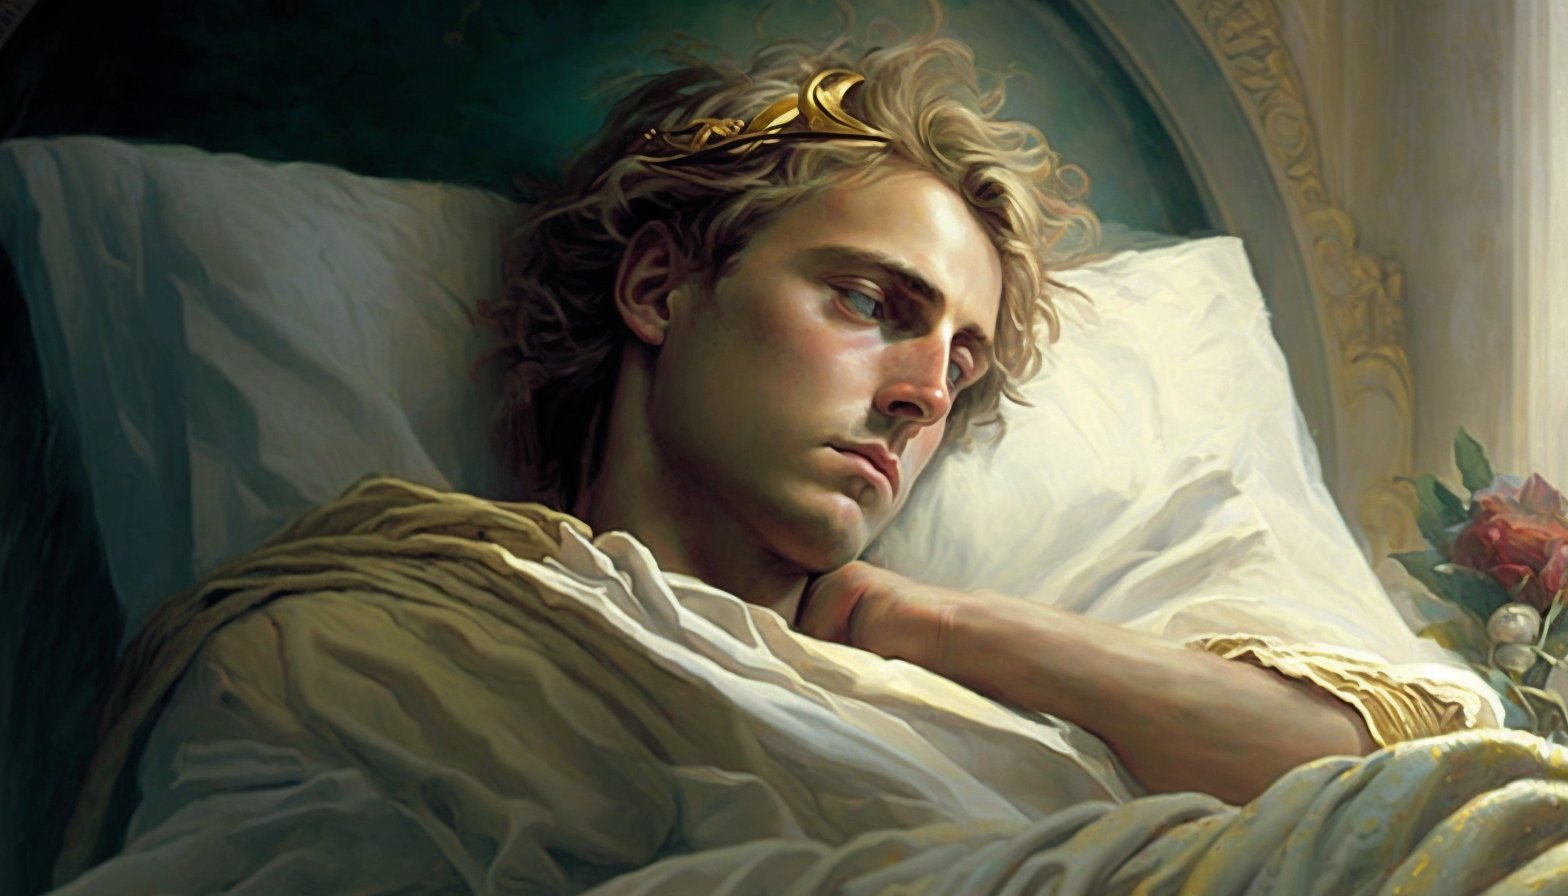 Artwork showing Alexander the Great on his death bed